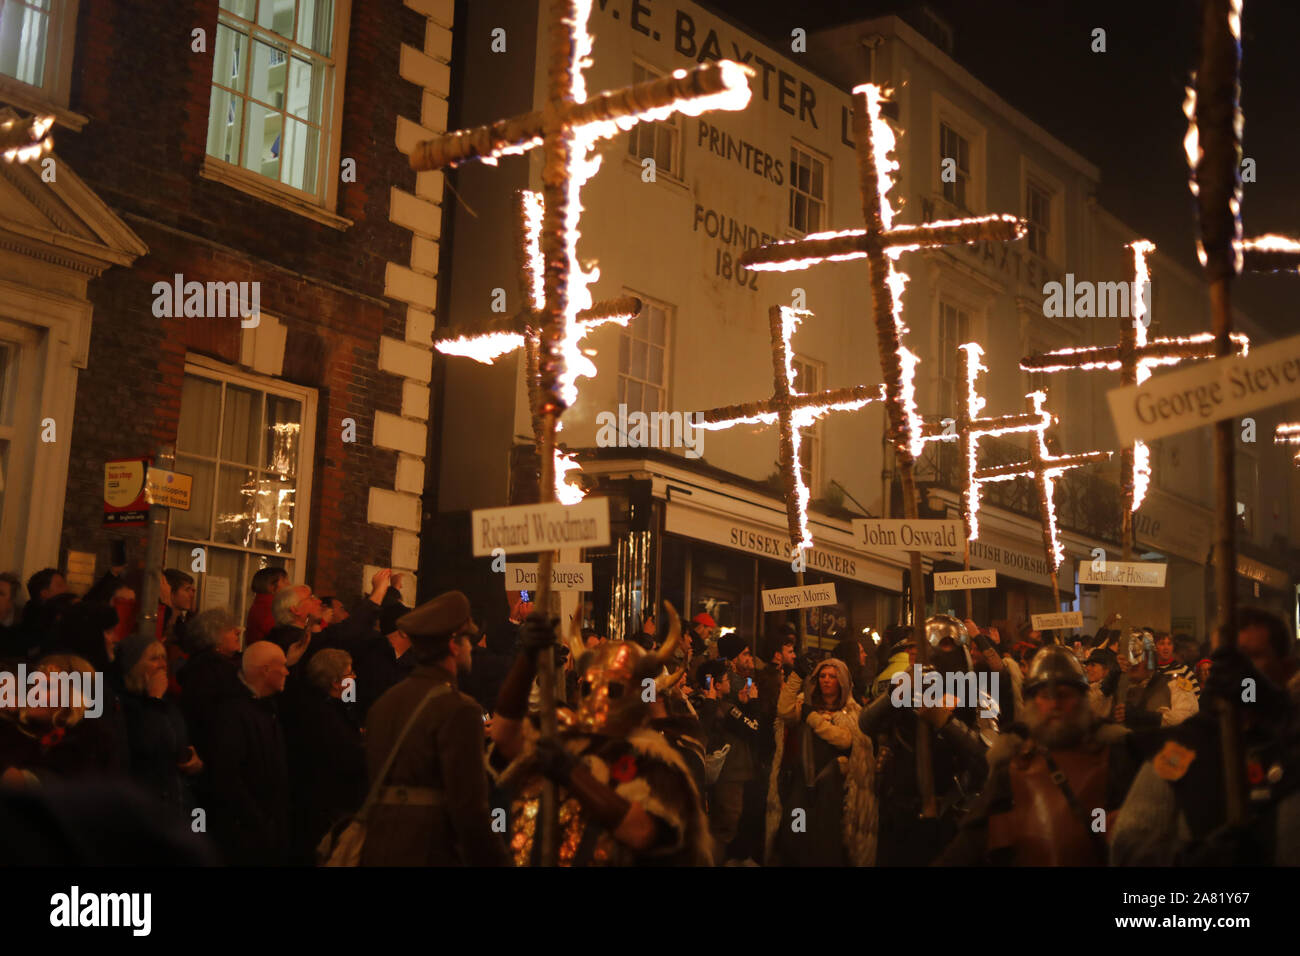 Lewes,UK.5th Nov 2019.Thousands of people flocked to Lewes this evening as the town celebrated its annual bonfire night tradition.Lewes, East Sussex,UK.Credit:Ed Brown/Alamy Live News Stock Photo